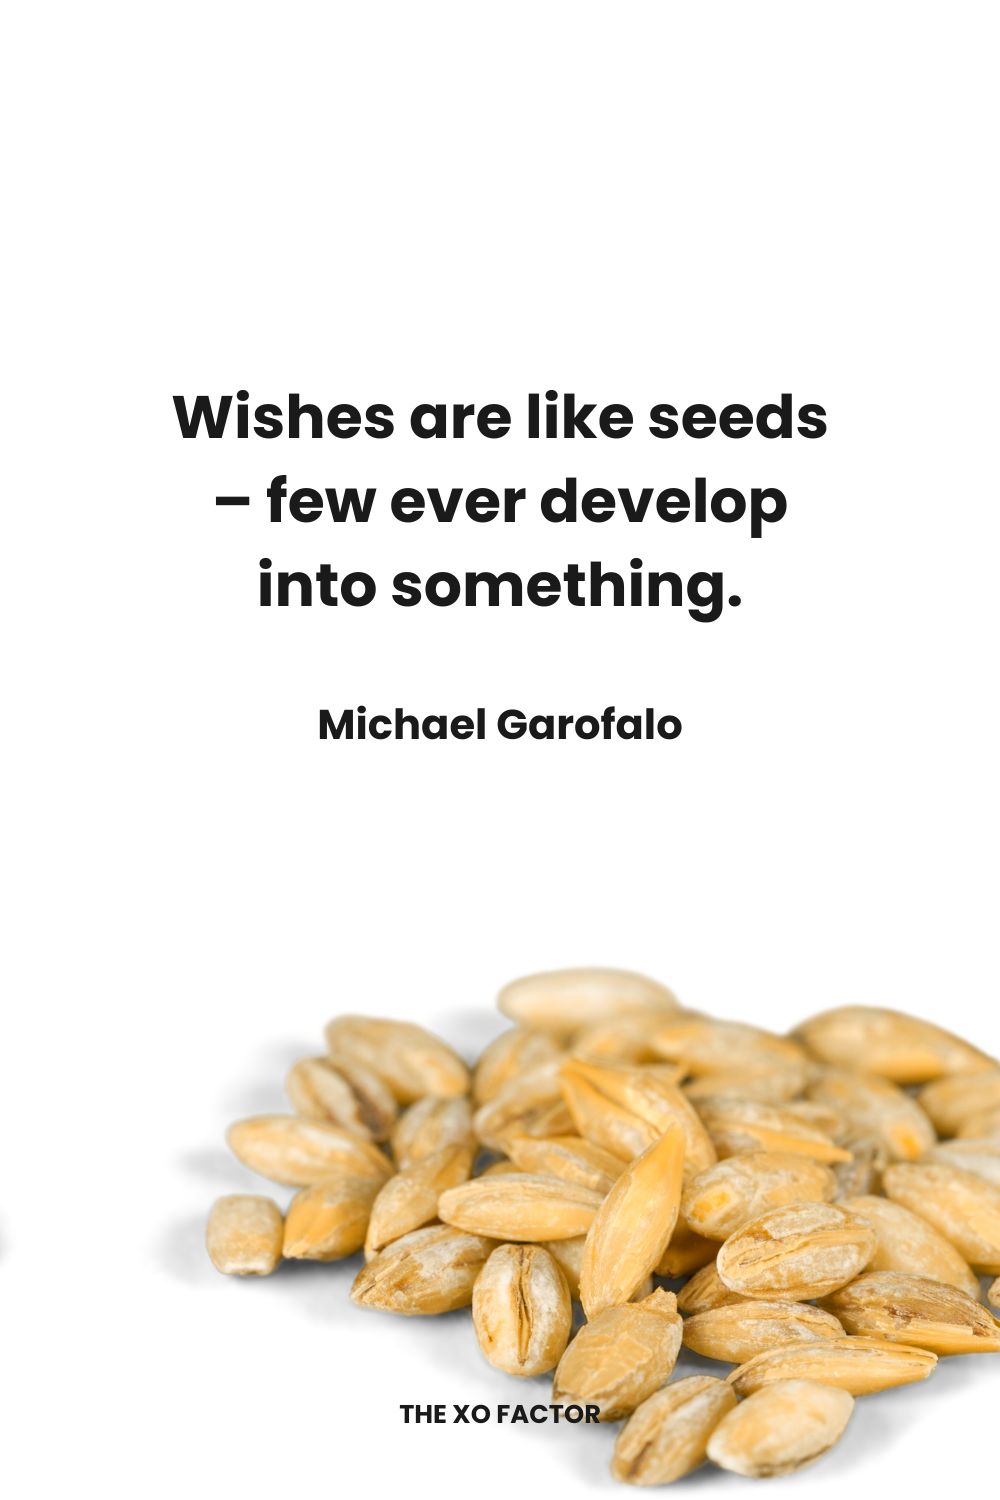 Wishes are like seeds – few ever develop into something. Michael Garofalo